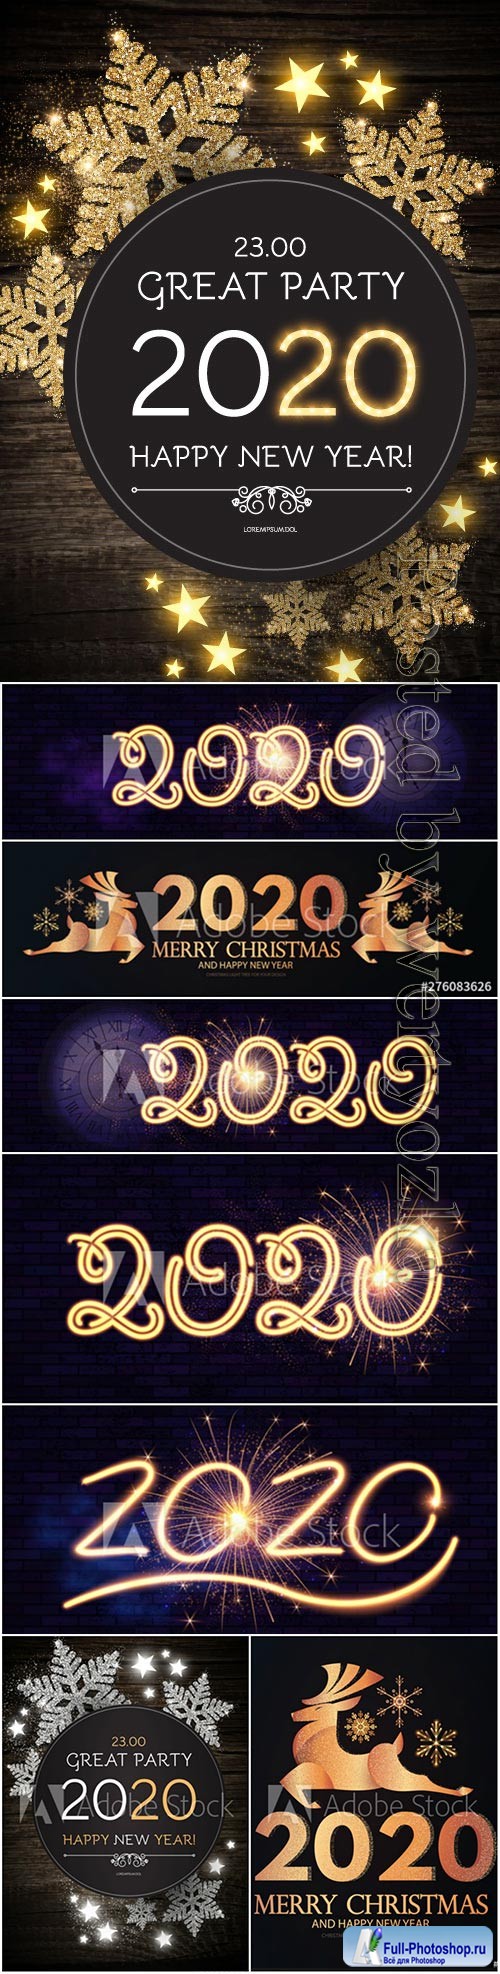 2020 Christmas and New Year vector backgrounds with golden 